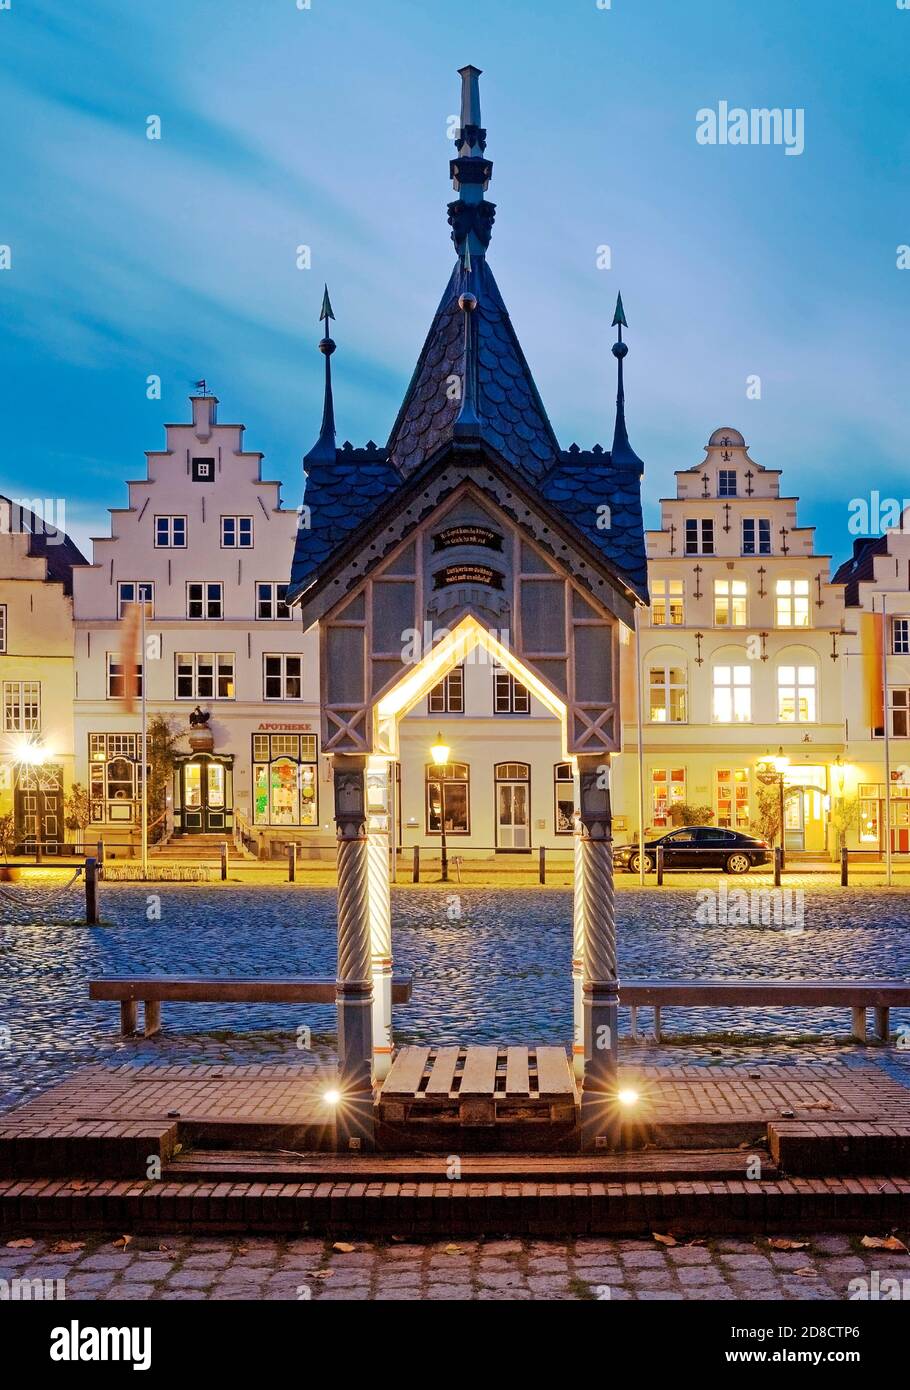 historic water pump on the market square in front of houses with stepped gables in the evening, Germany, Schleswig-Holstein, Northern Frisia, Stock Photo